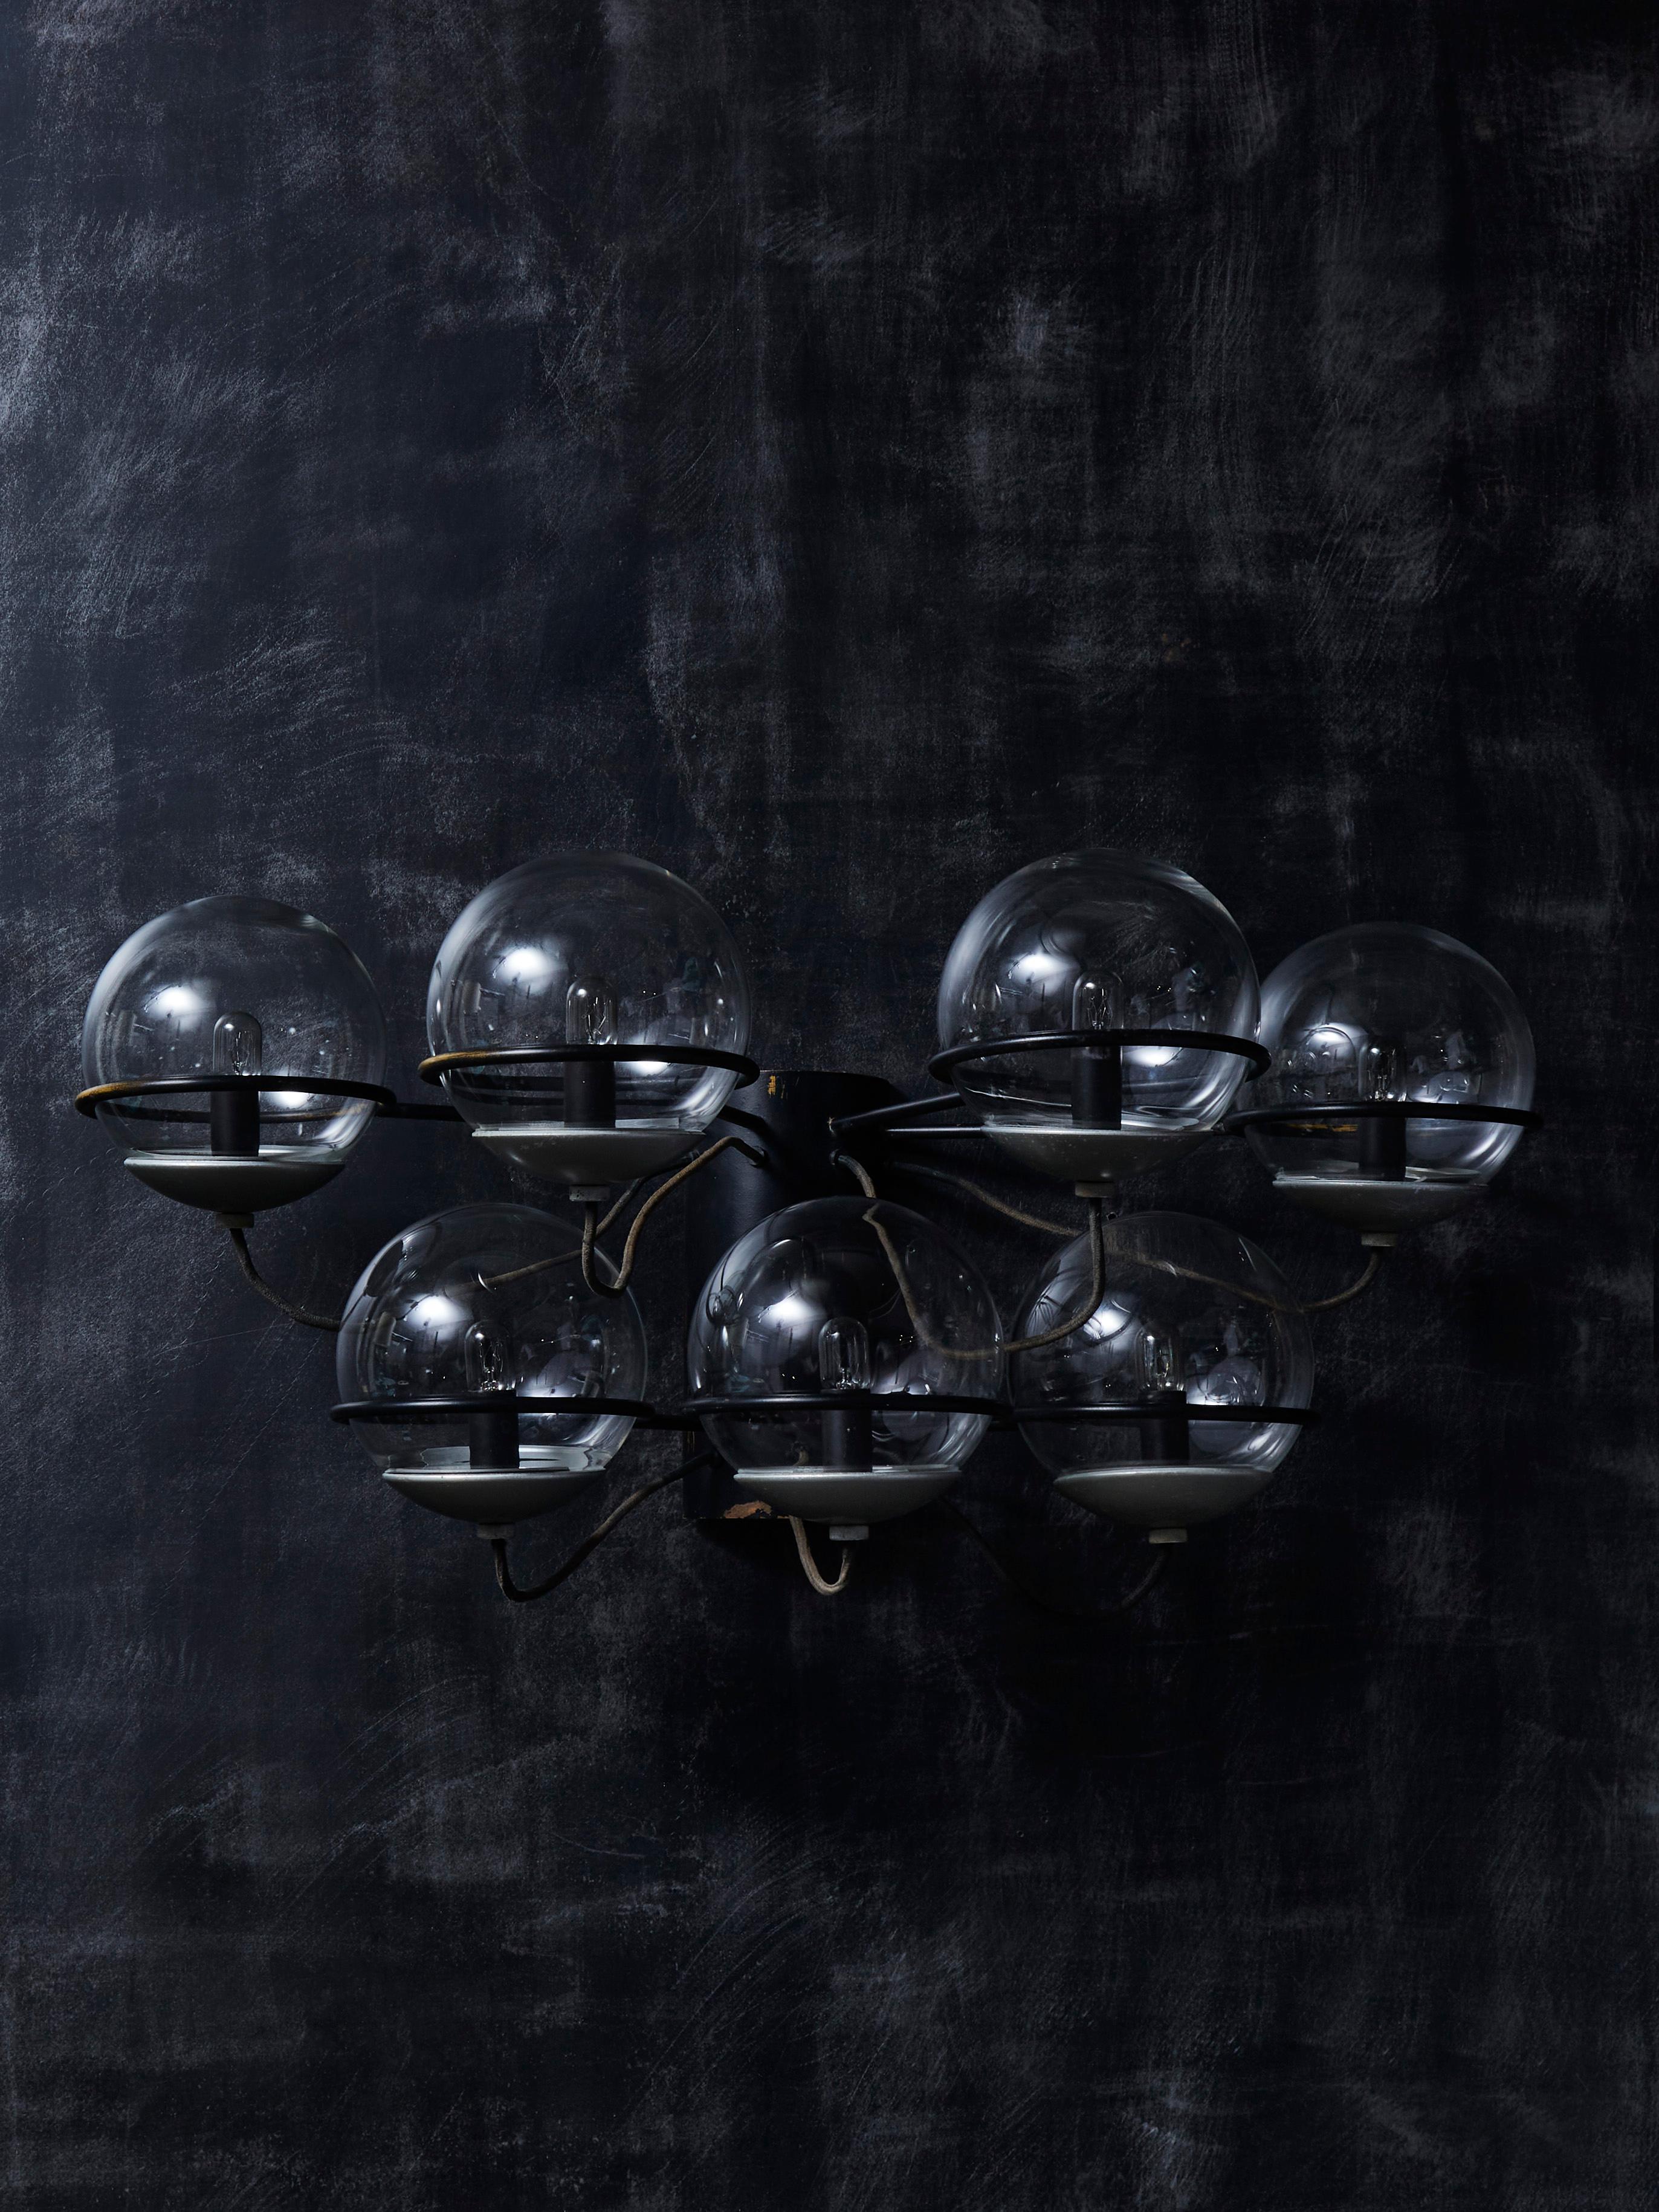 Wall sconce model 237/7 designed by Gino Sarfatti for Arteluce, circa 1960s

Black enameled metal structure holding seven transparent glass globes.